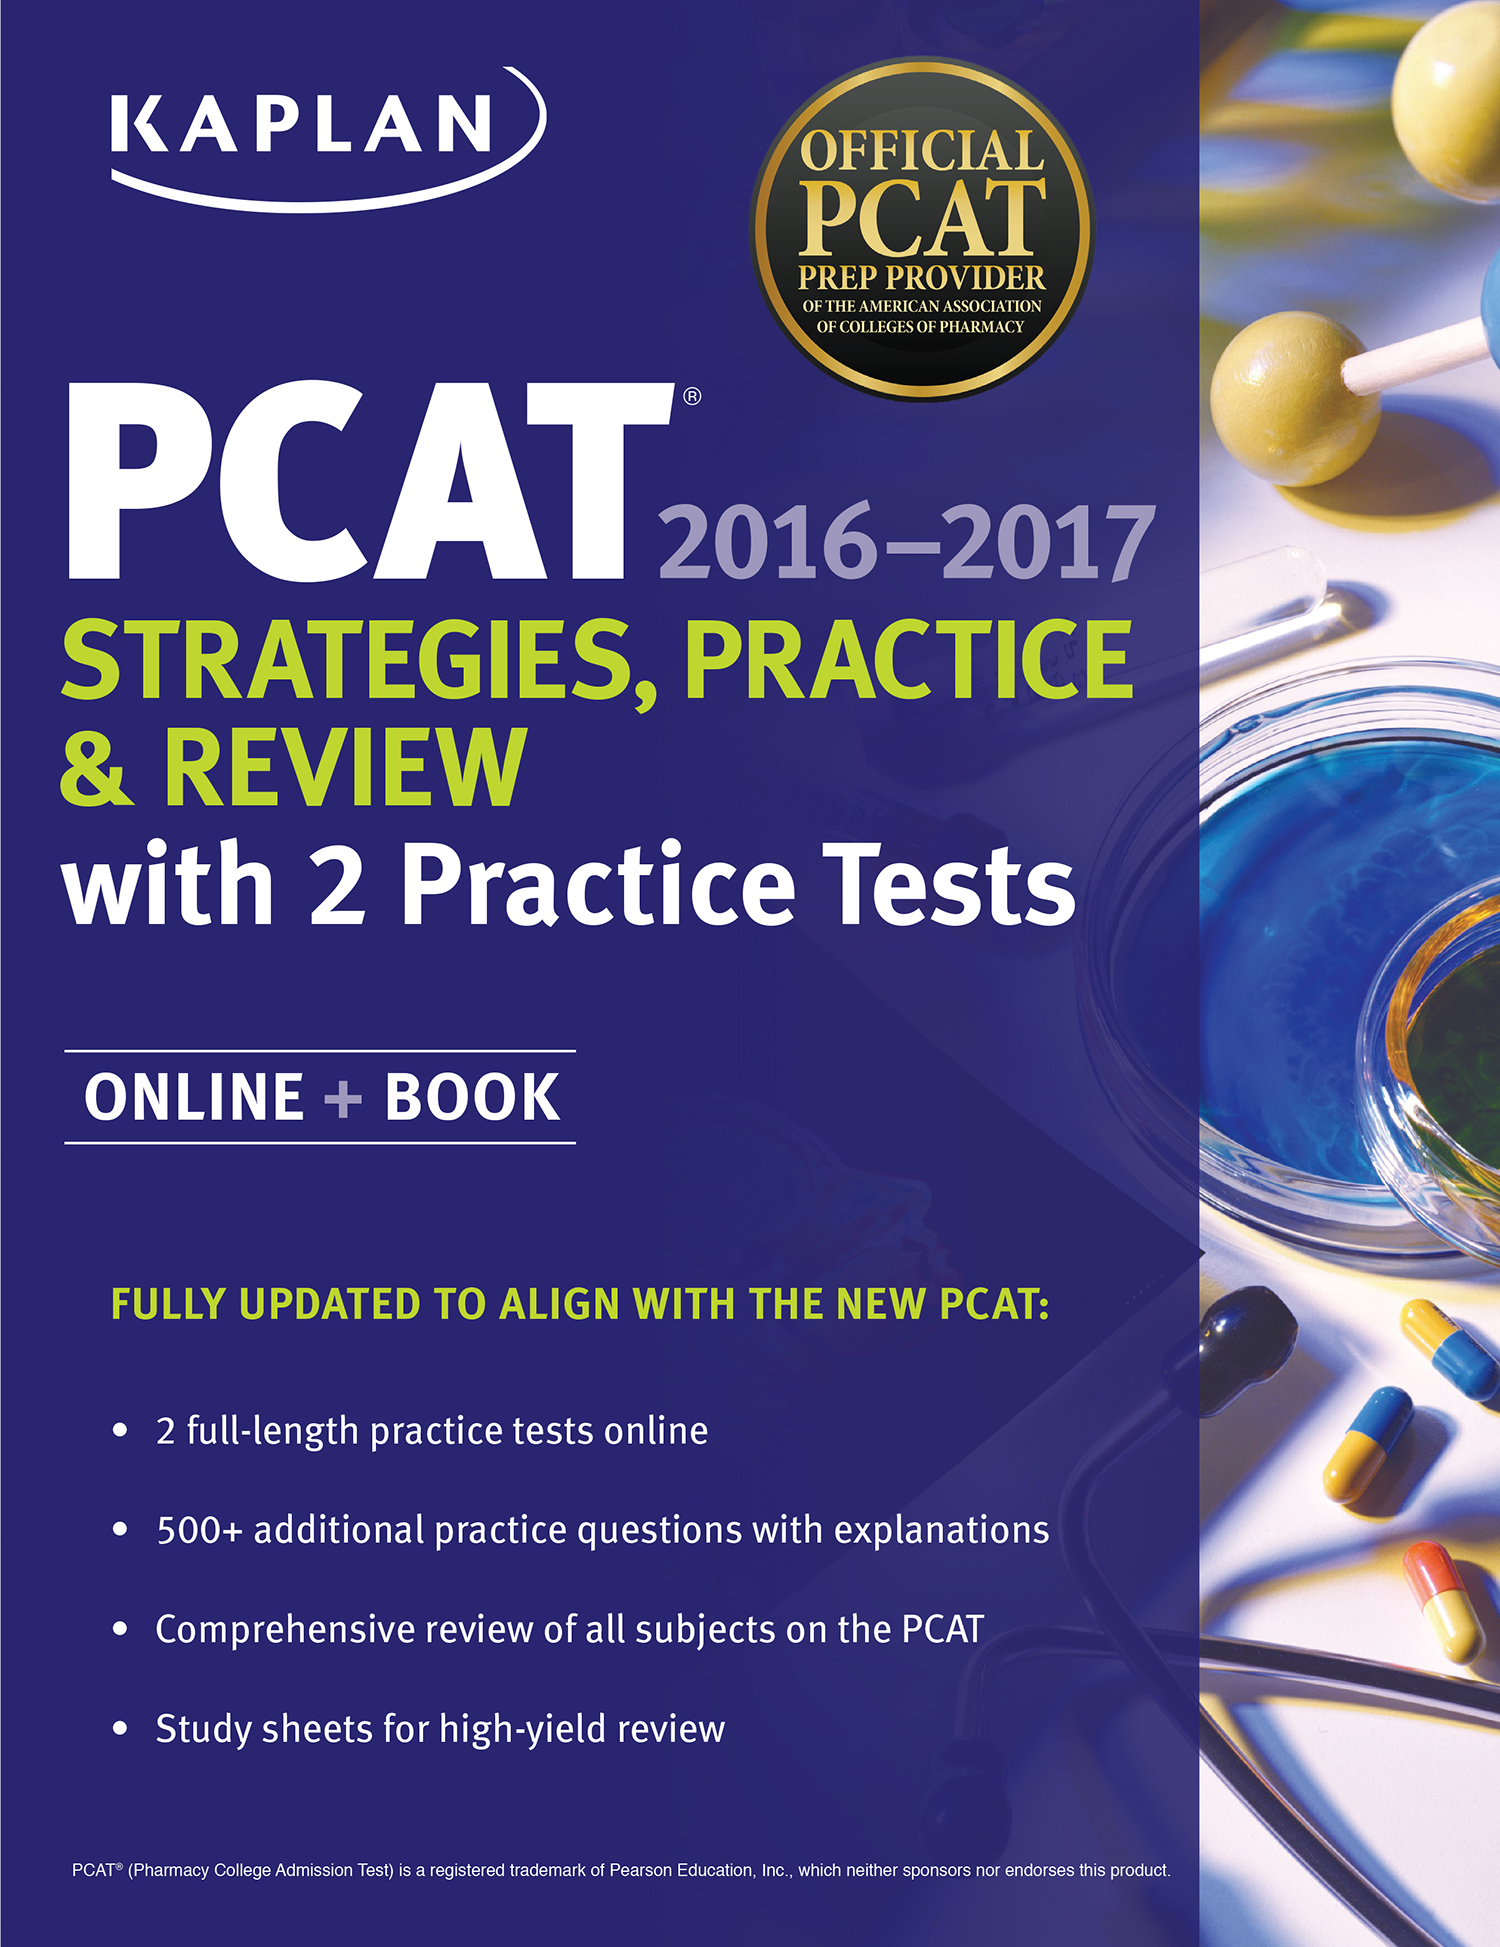 Available Online kaptestcomPCAT1617 Log in to Kaplans PCAT online companion - photo 1